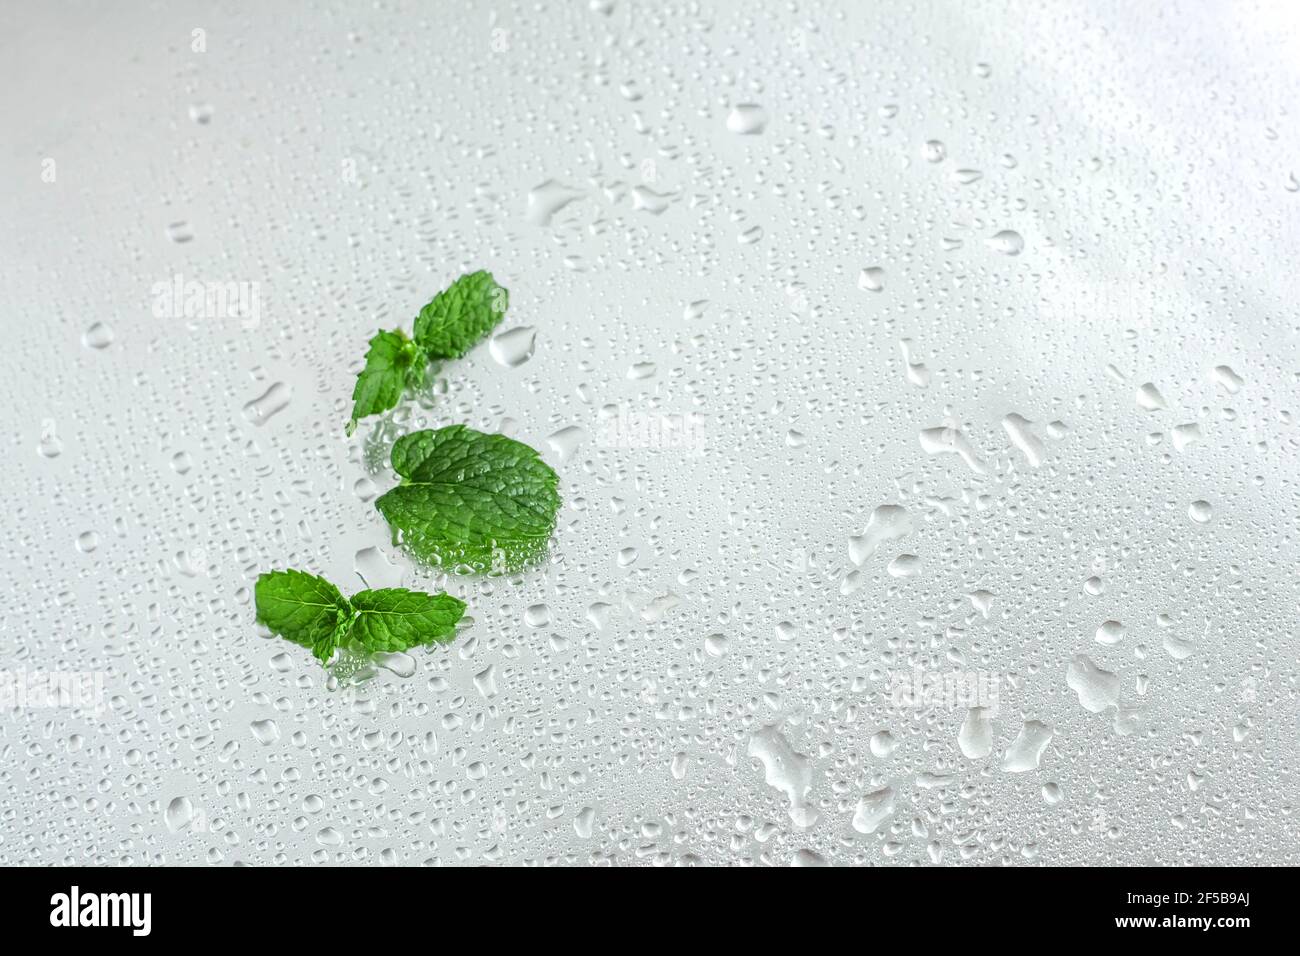 Freshness leaves of mint on drops metal background. Top view. Plant pattern. Stock Photo